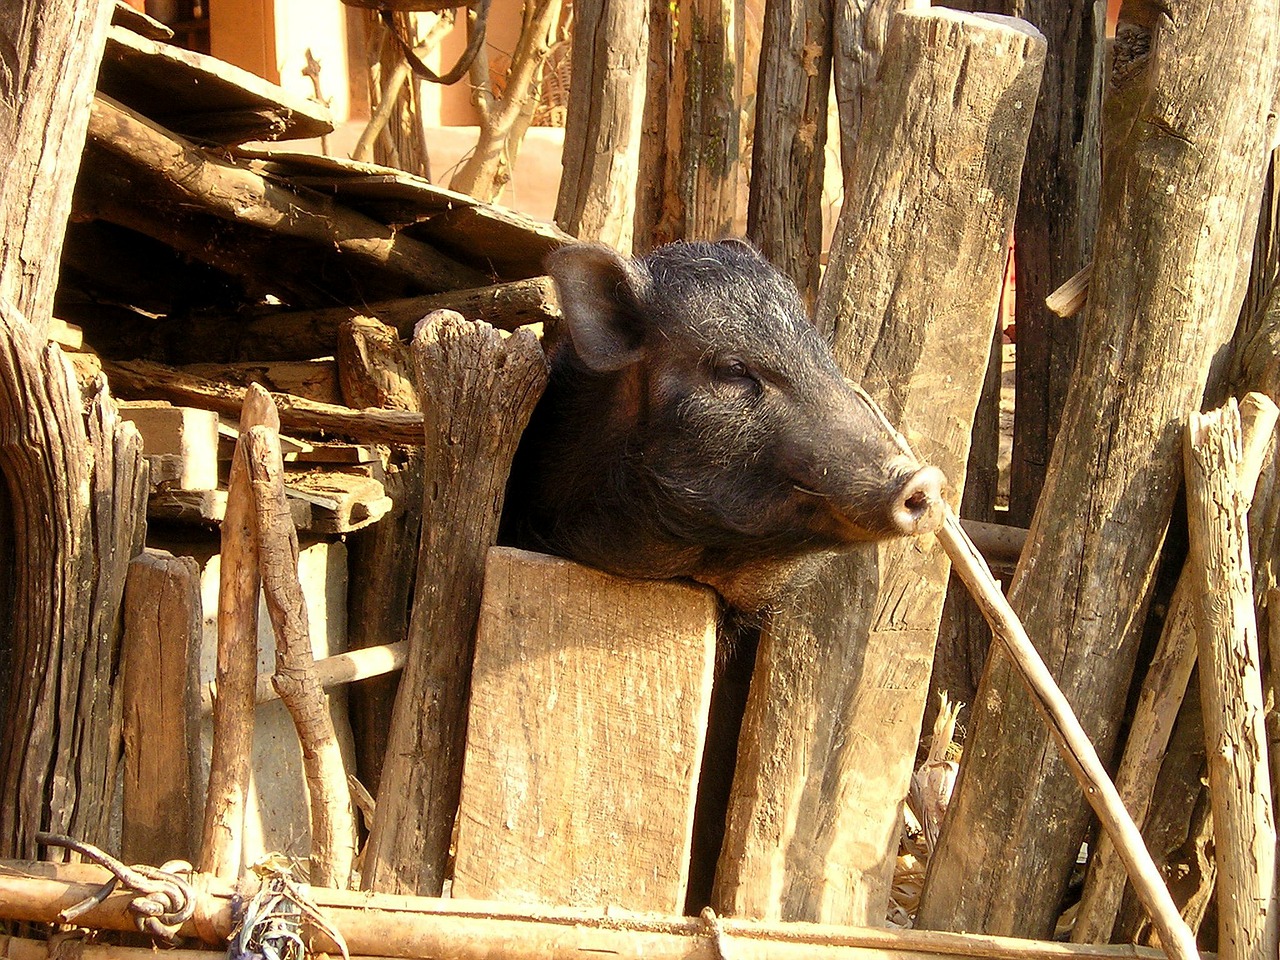 nepal,pig,piglet,head,free pictures, free photos, free images, royalty free, free illustrations, public domain